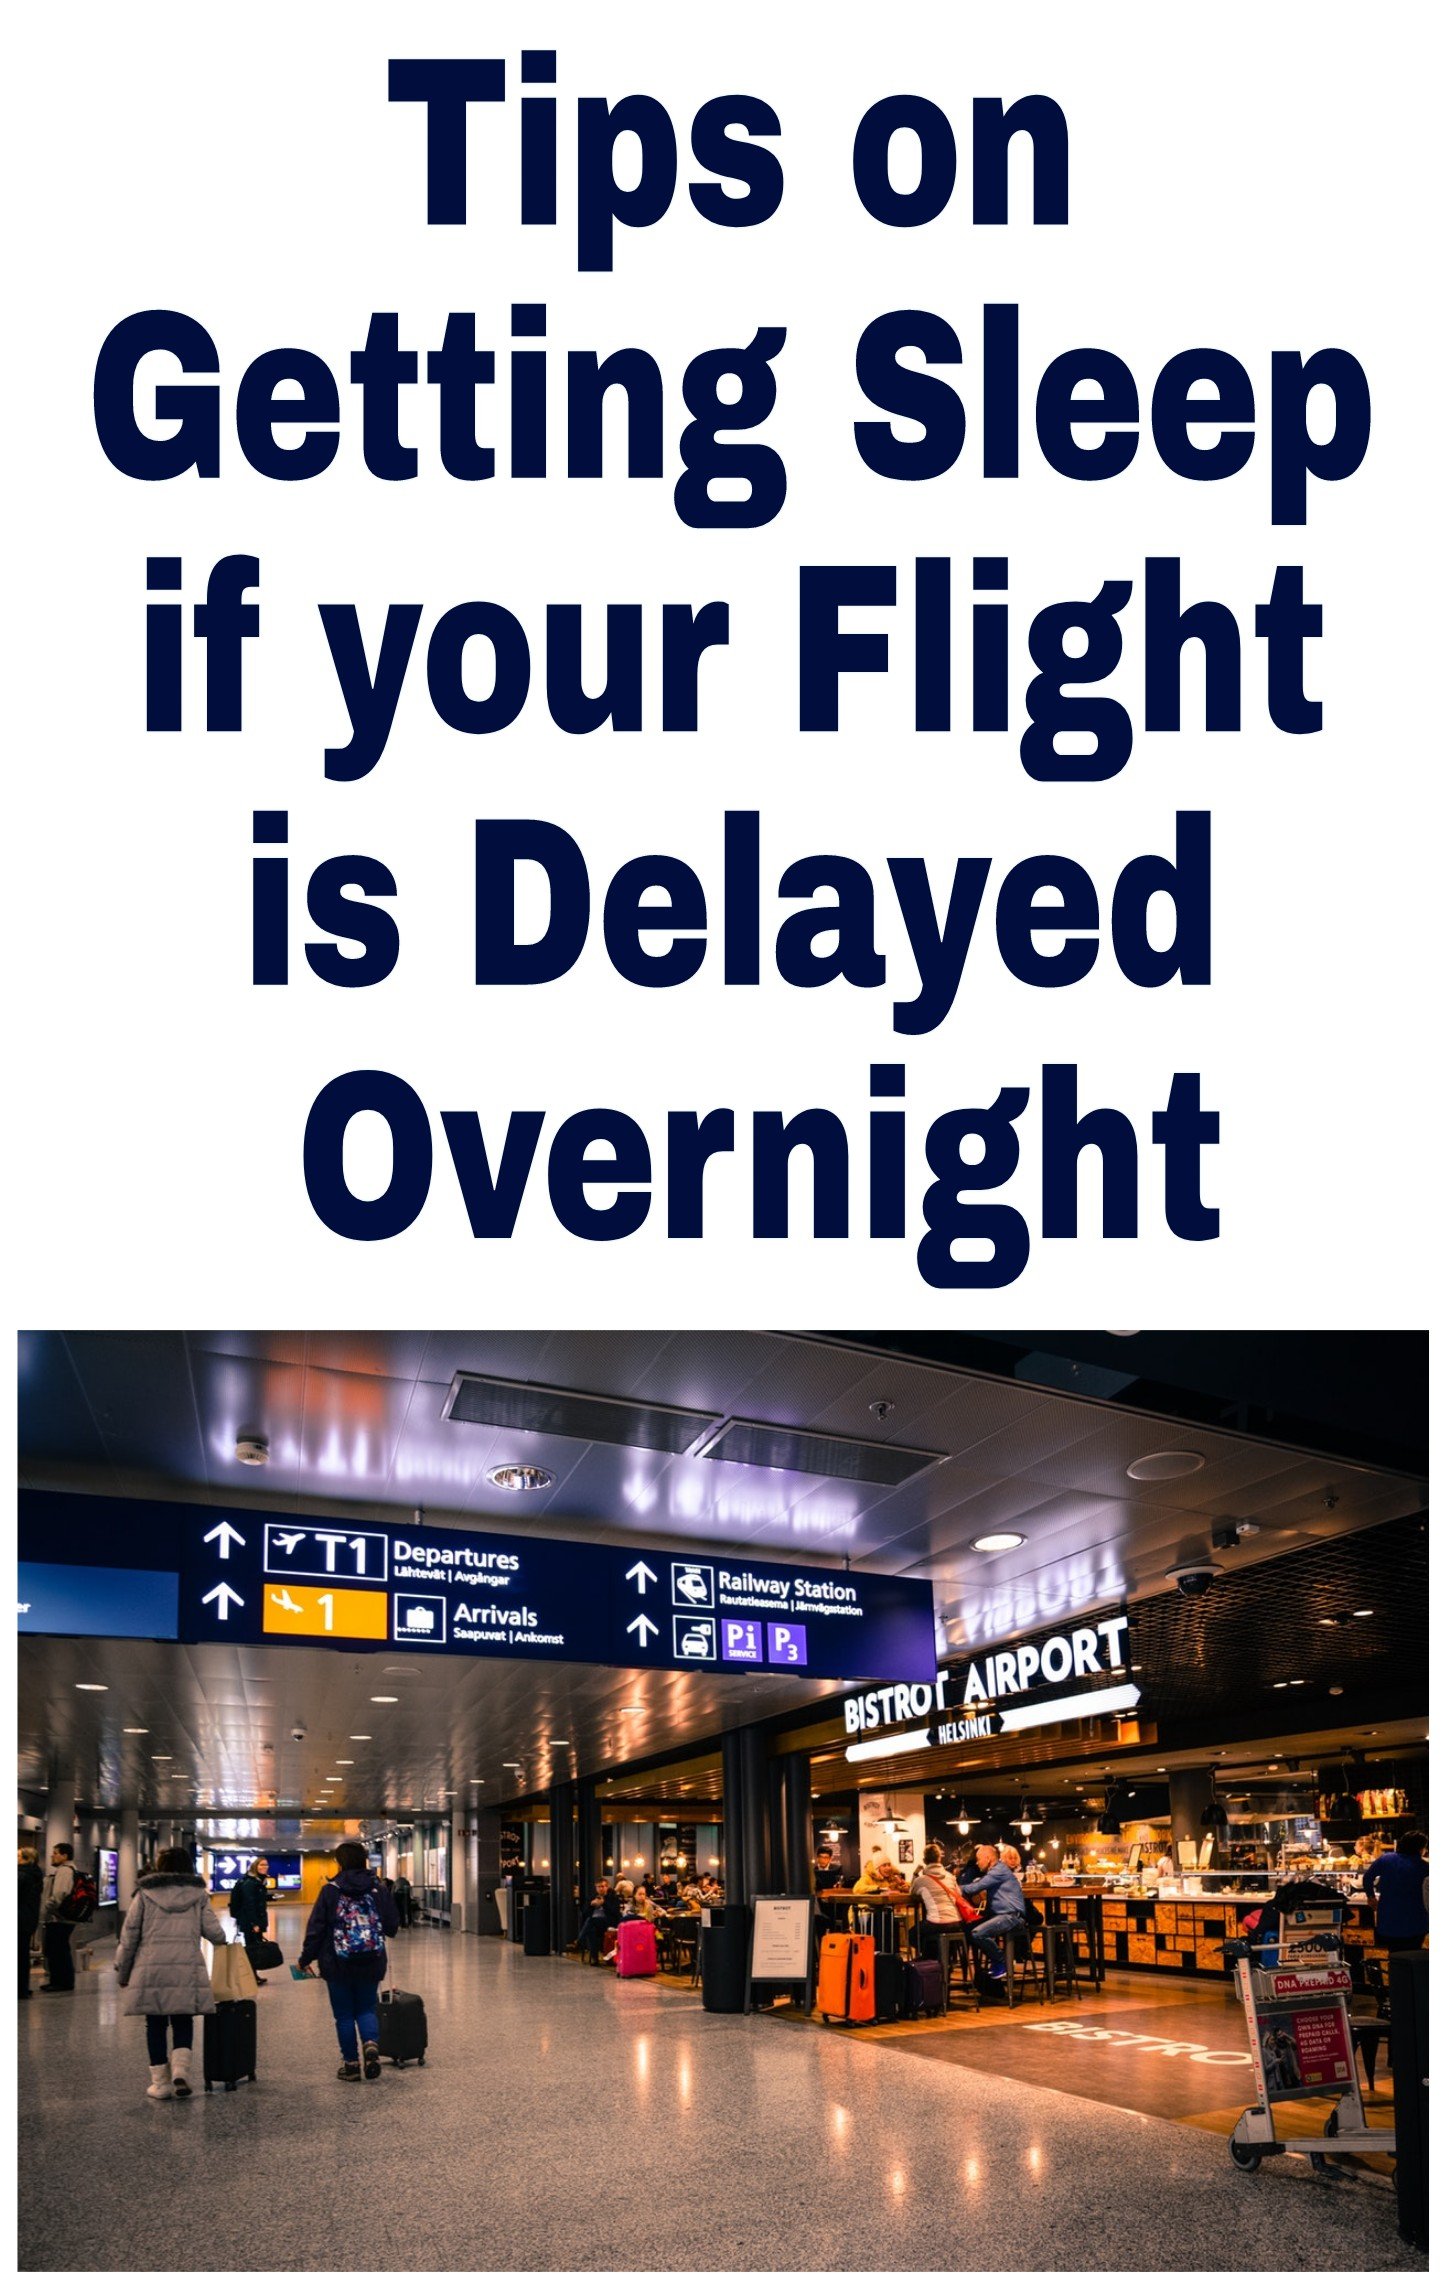 Tips on Getting Some Sleep if your Flight is Delayed Overnight. Image of inside airport at night